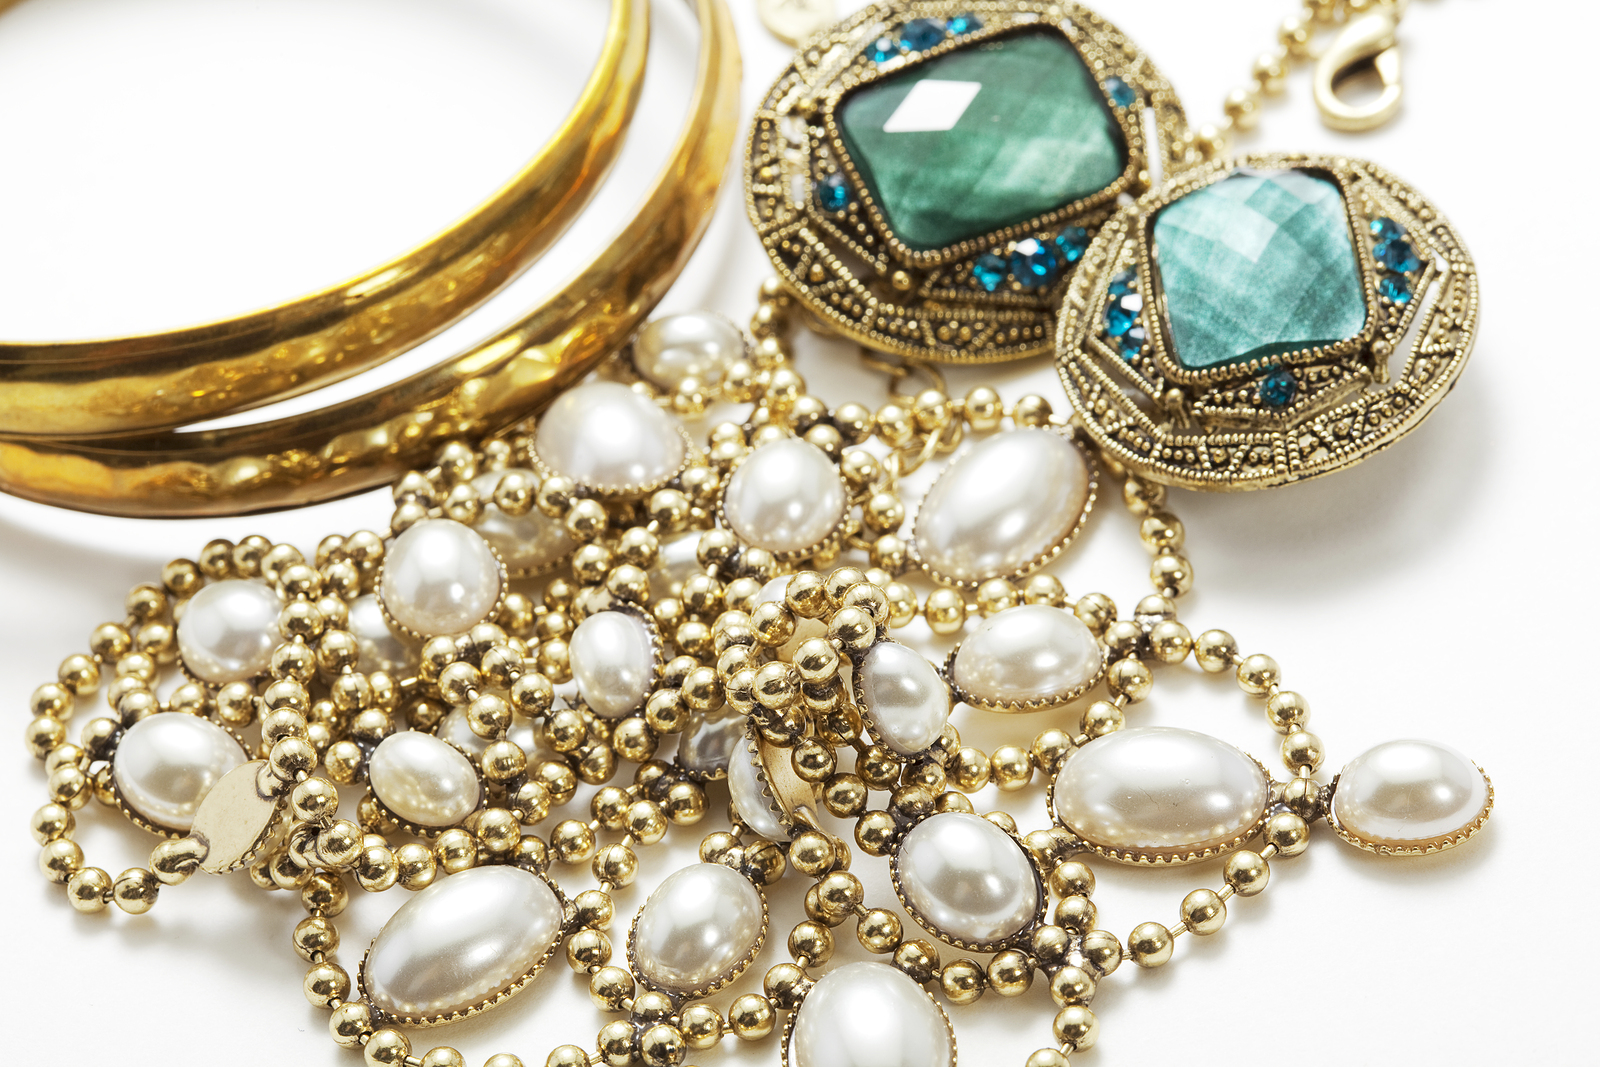 Antique jewelry: Your New Fashion Statement